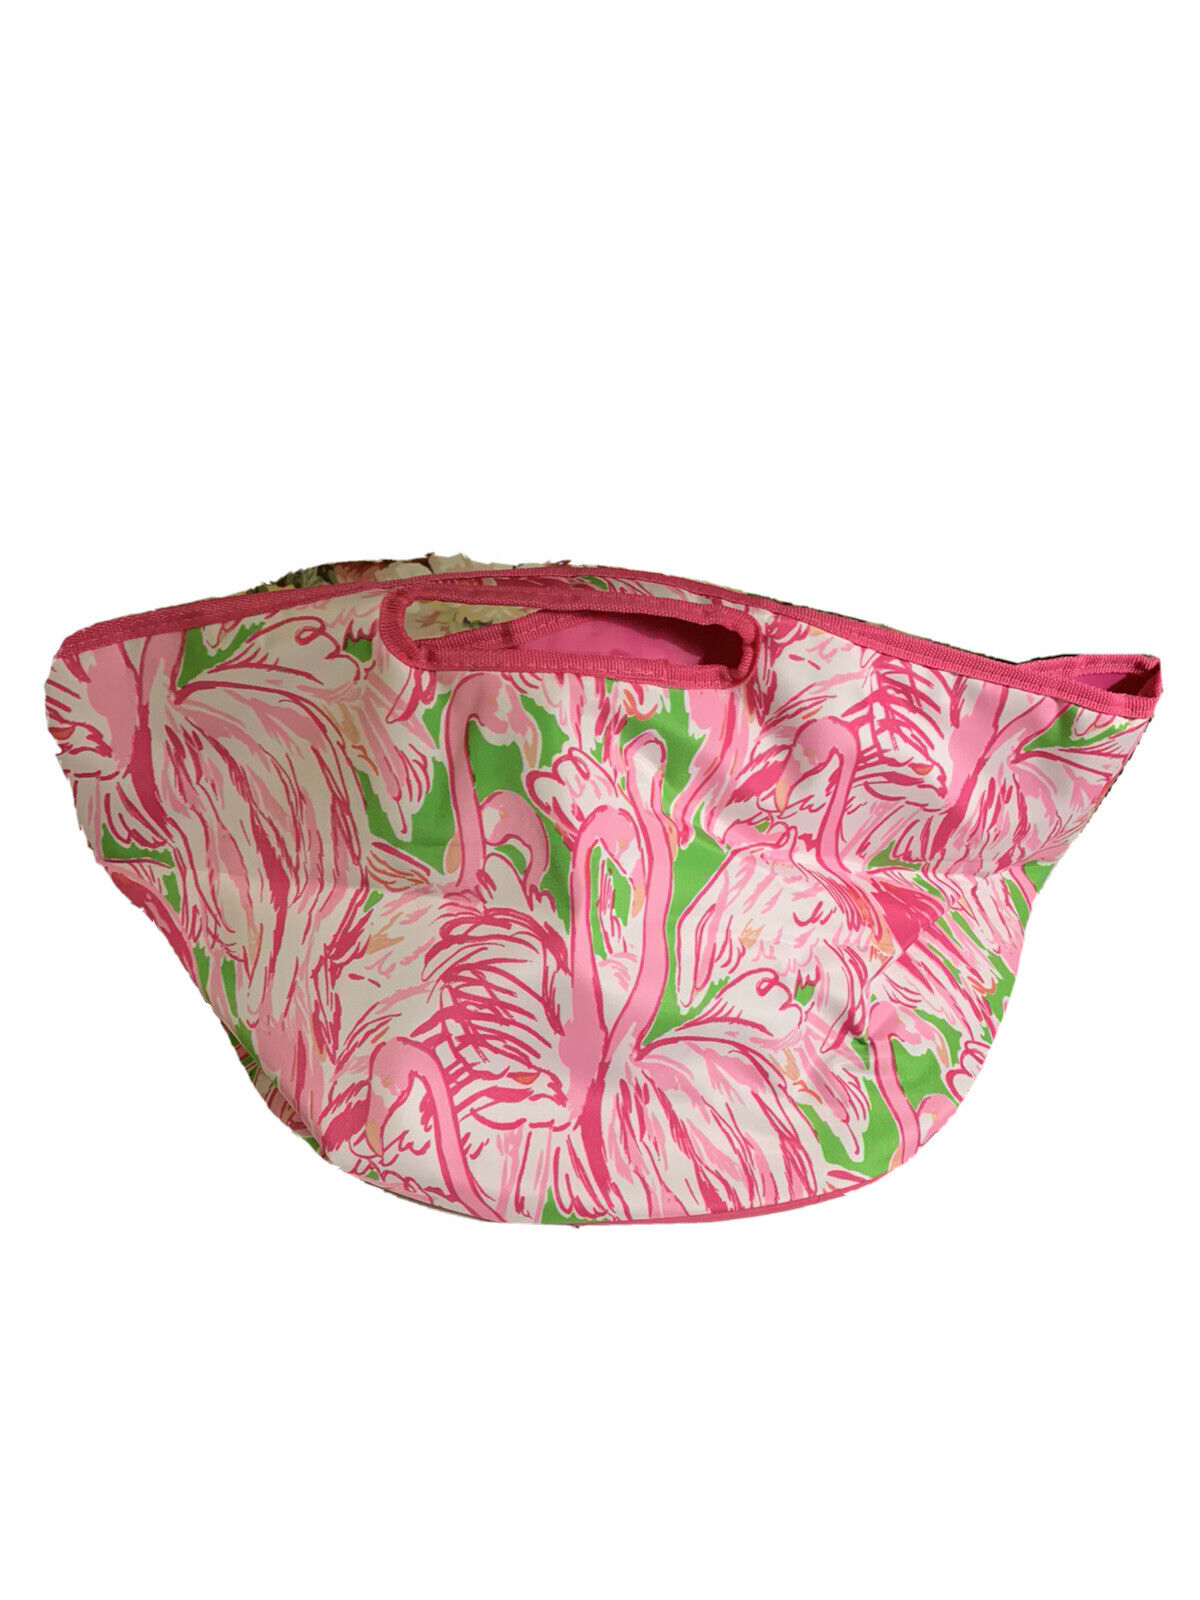 LILLY PULITZER INSULATED TOTE BAG BEACH TOTE flam… - image 3